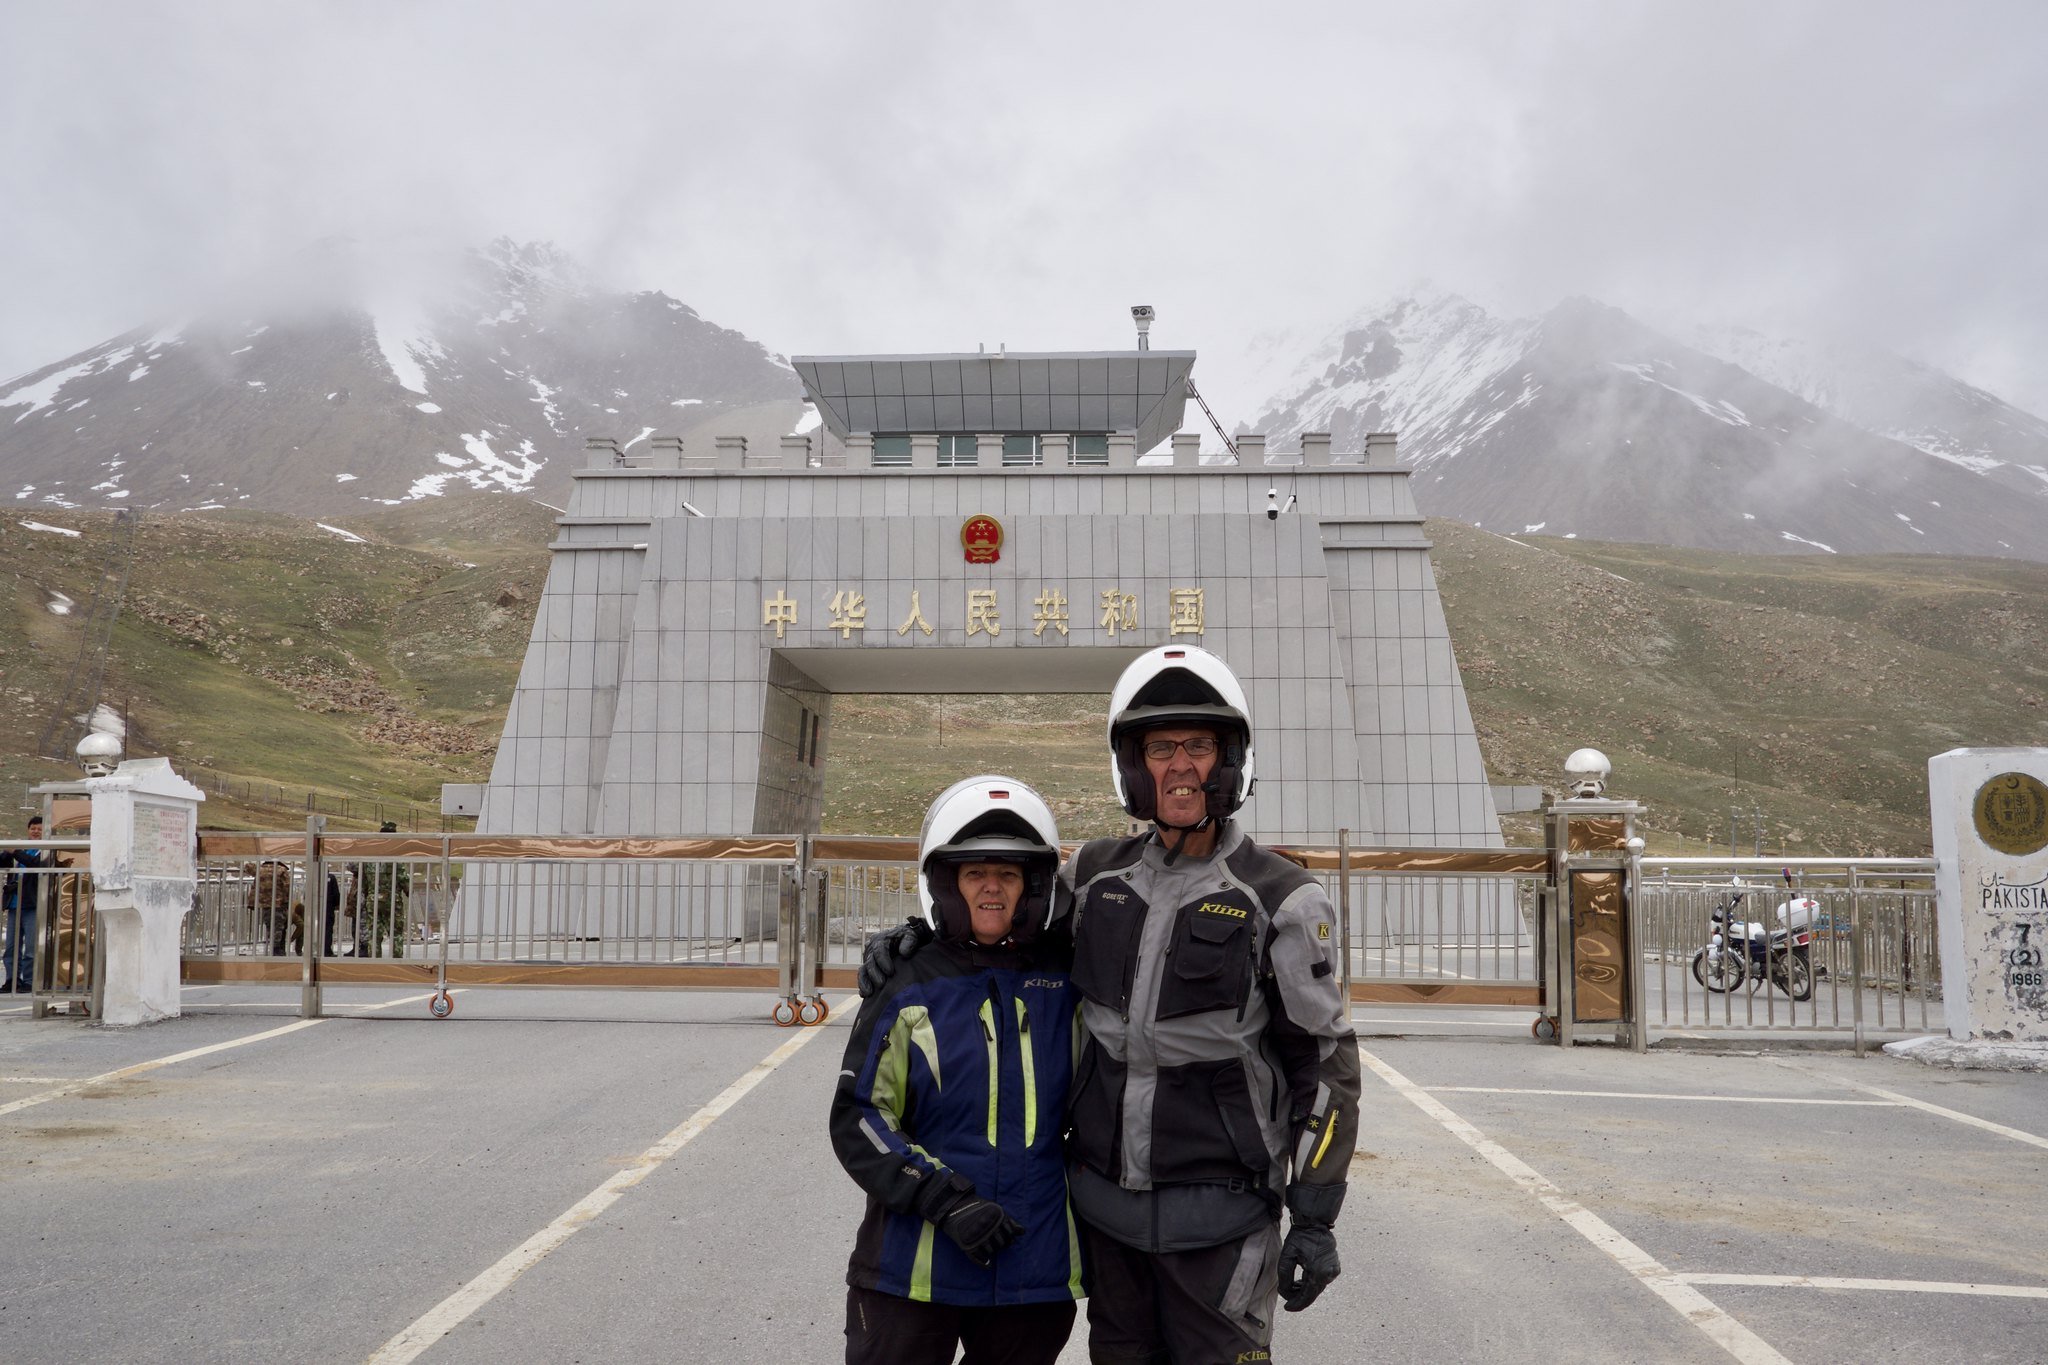  Graeme and Katrina at the highest border crossing in the world. The Khunjerab pass, Pakistan to China. 